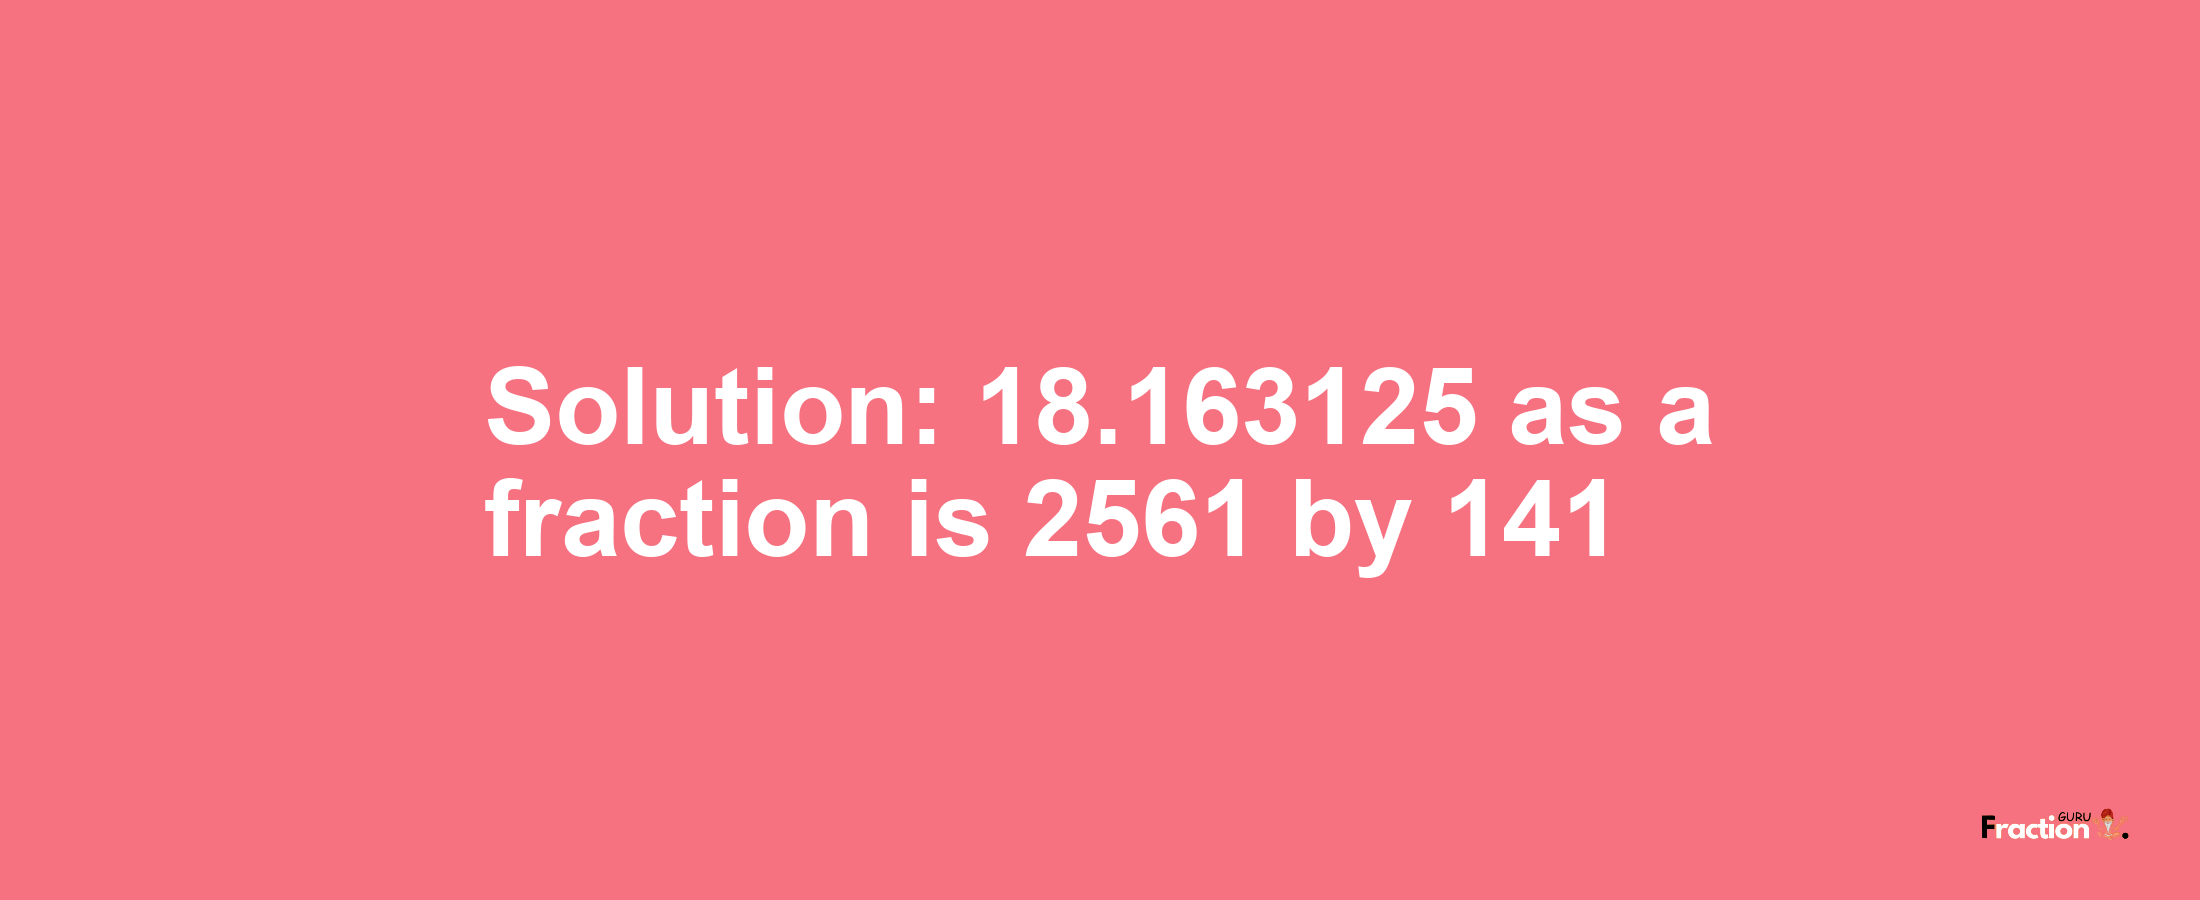 Solution:18.163125 as a fraction is 2561/141